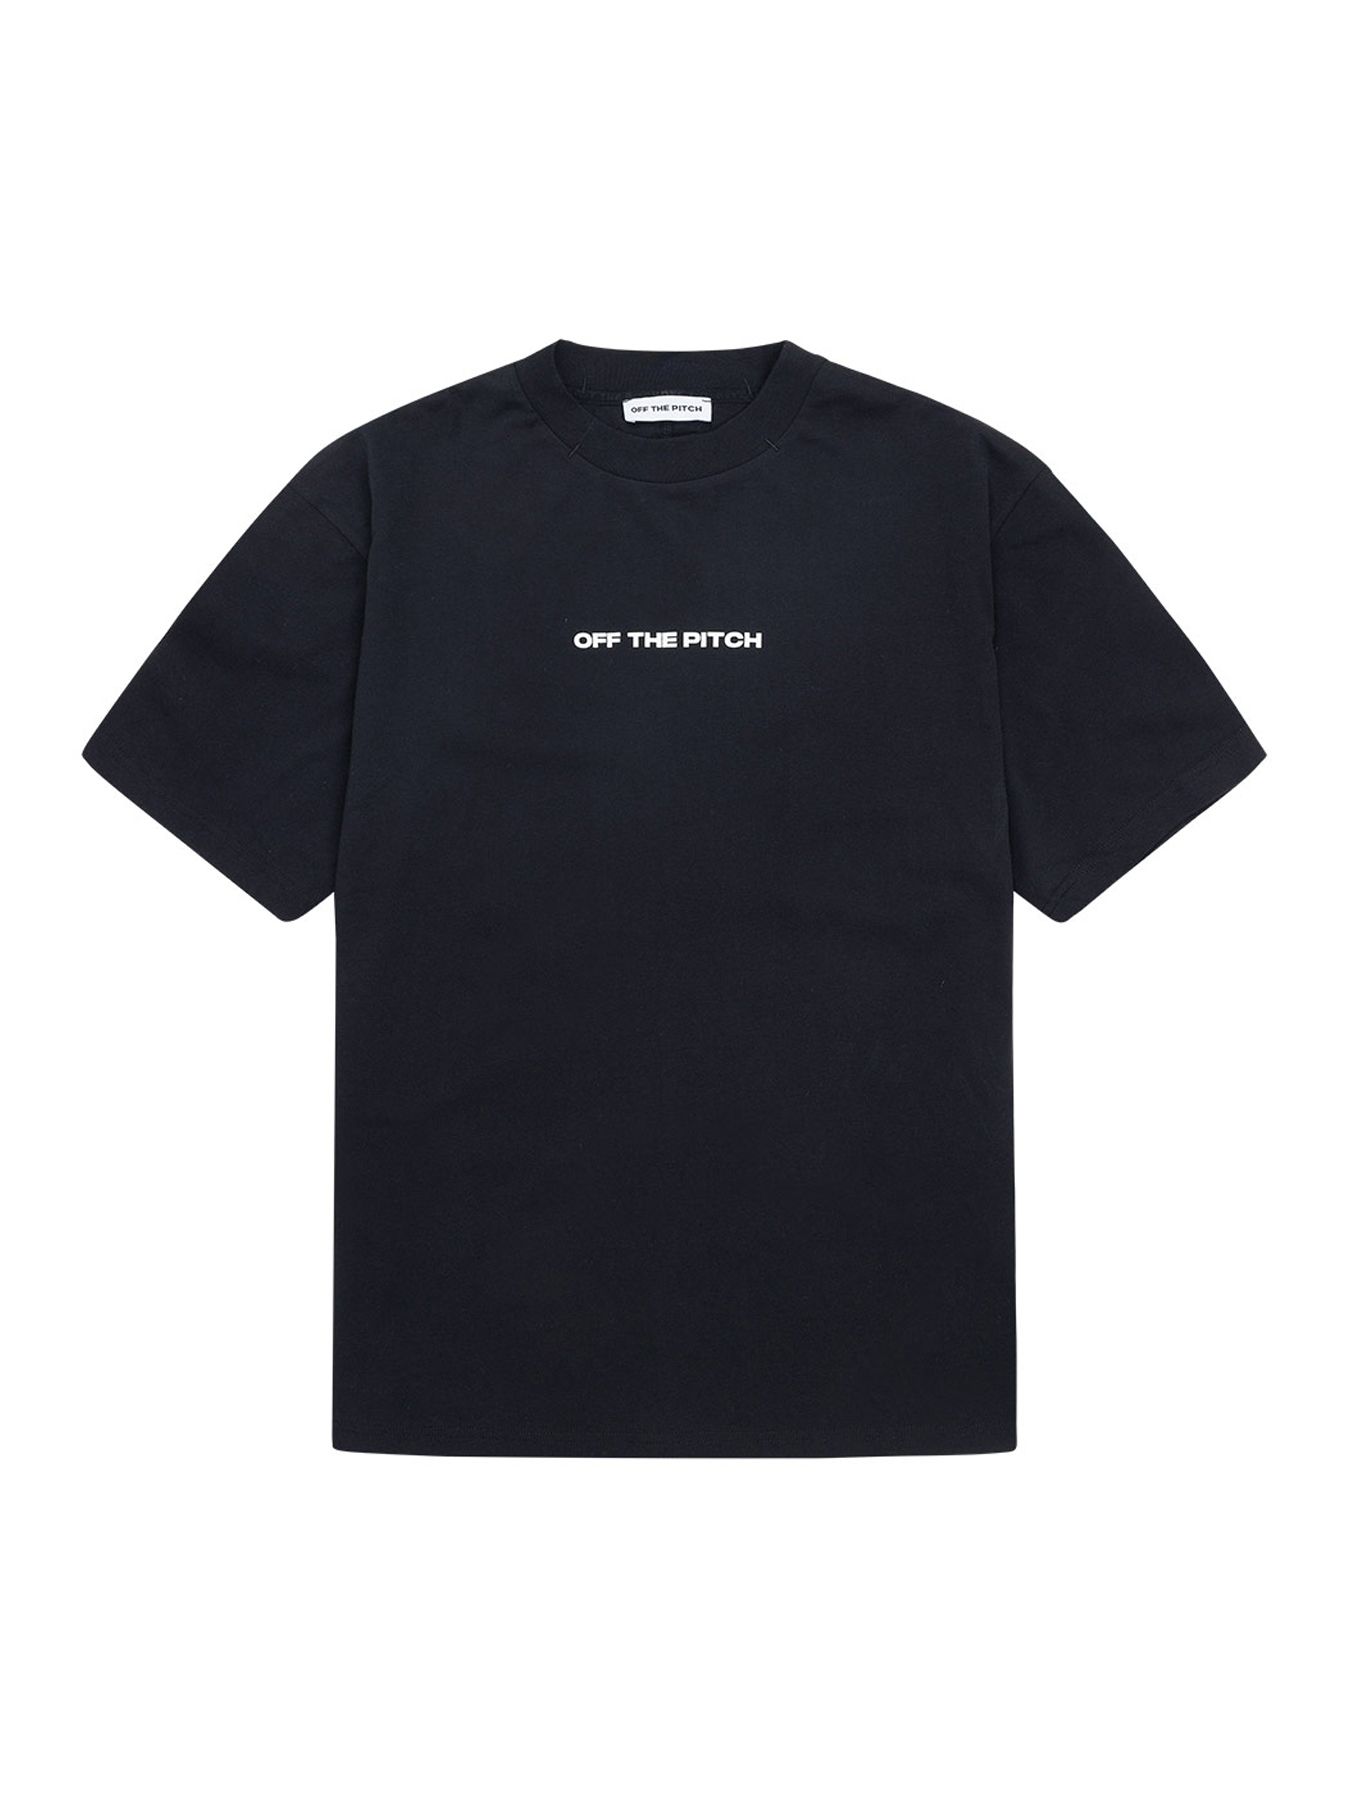 Off The Pitch Overlock Loose fit tee Black 00103738-BLC